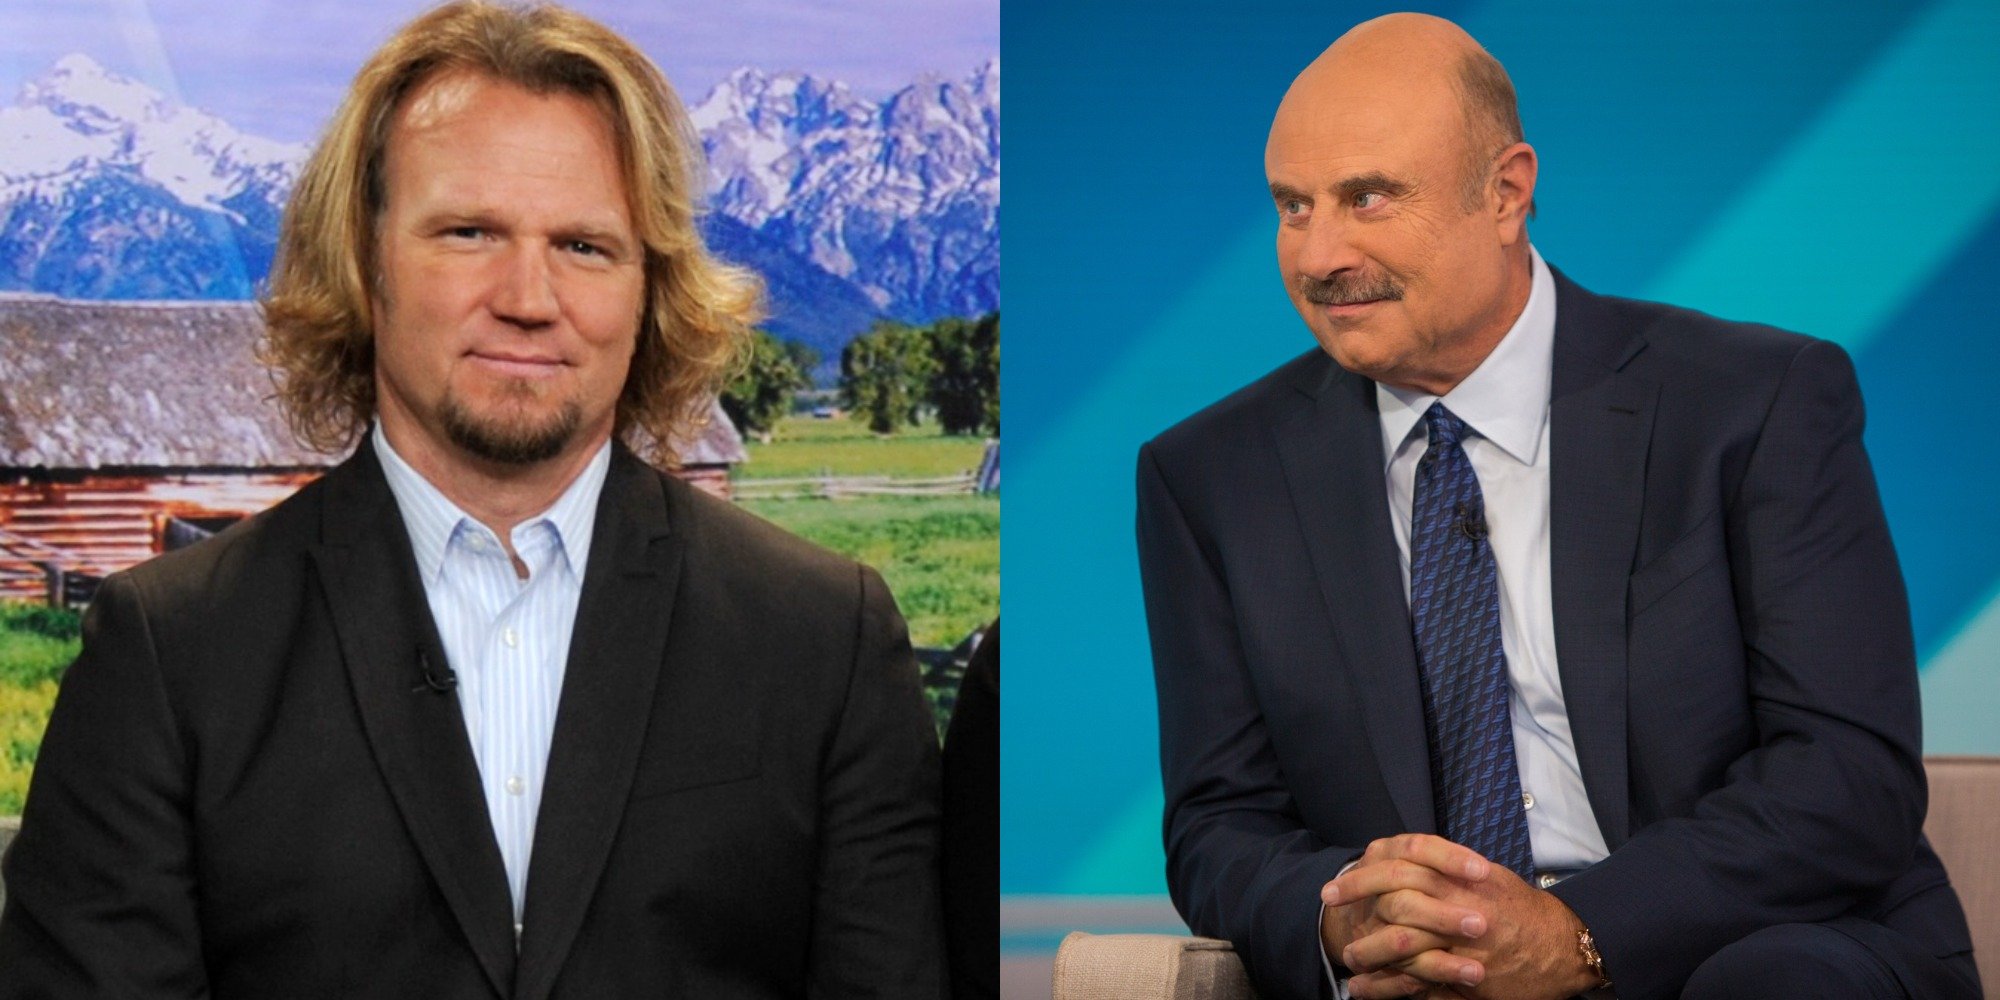 Kody Brown and Dr. Phil McGraw in two separate photos.